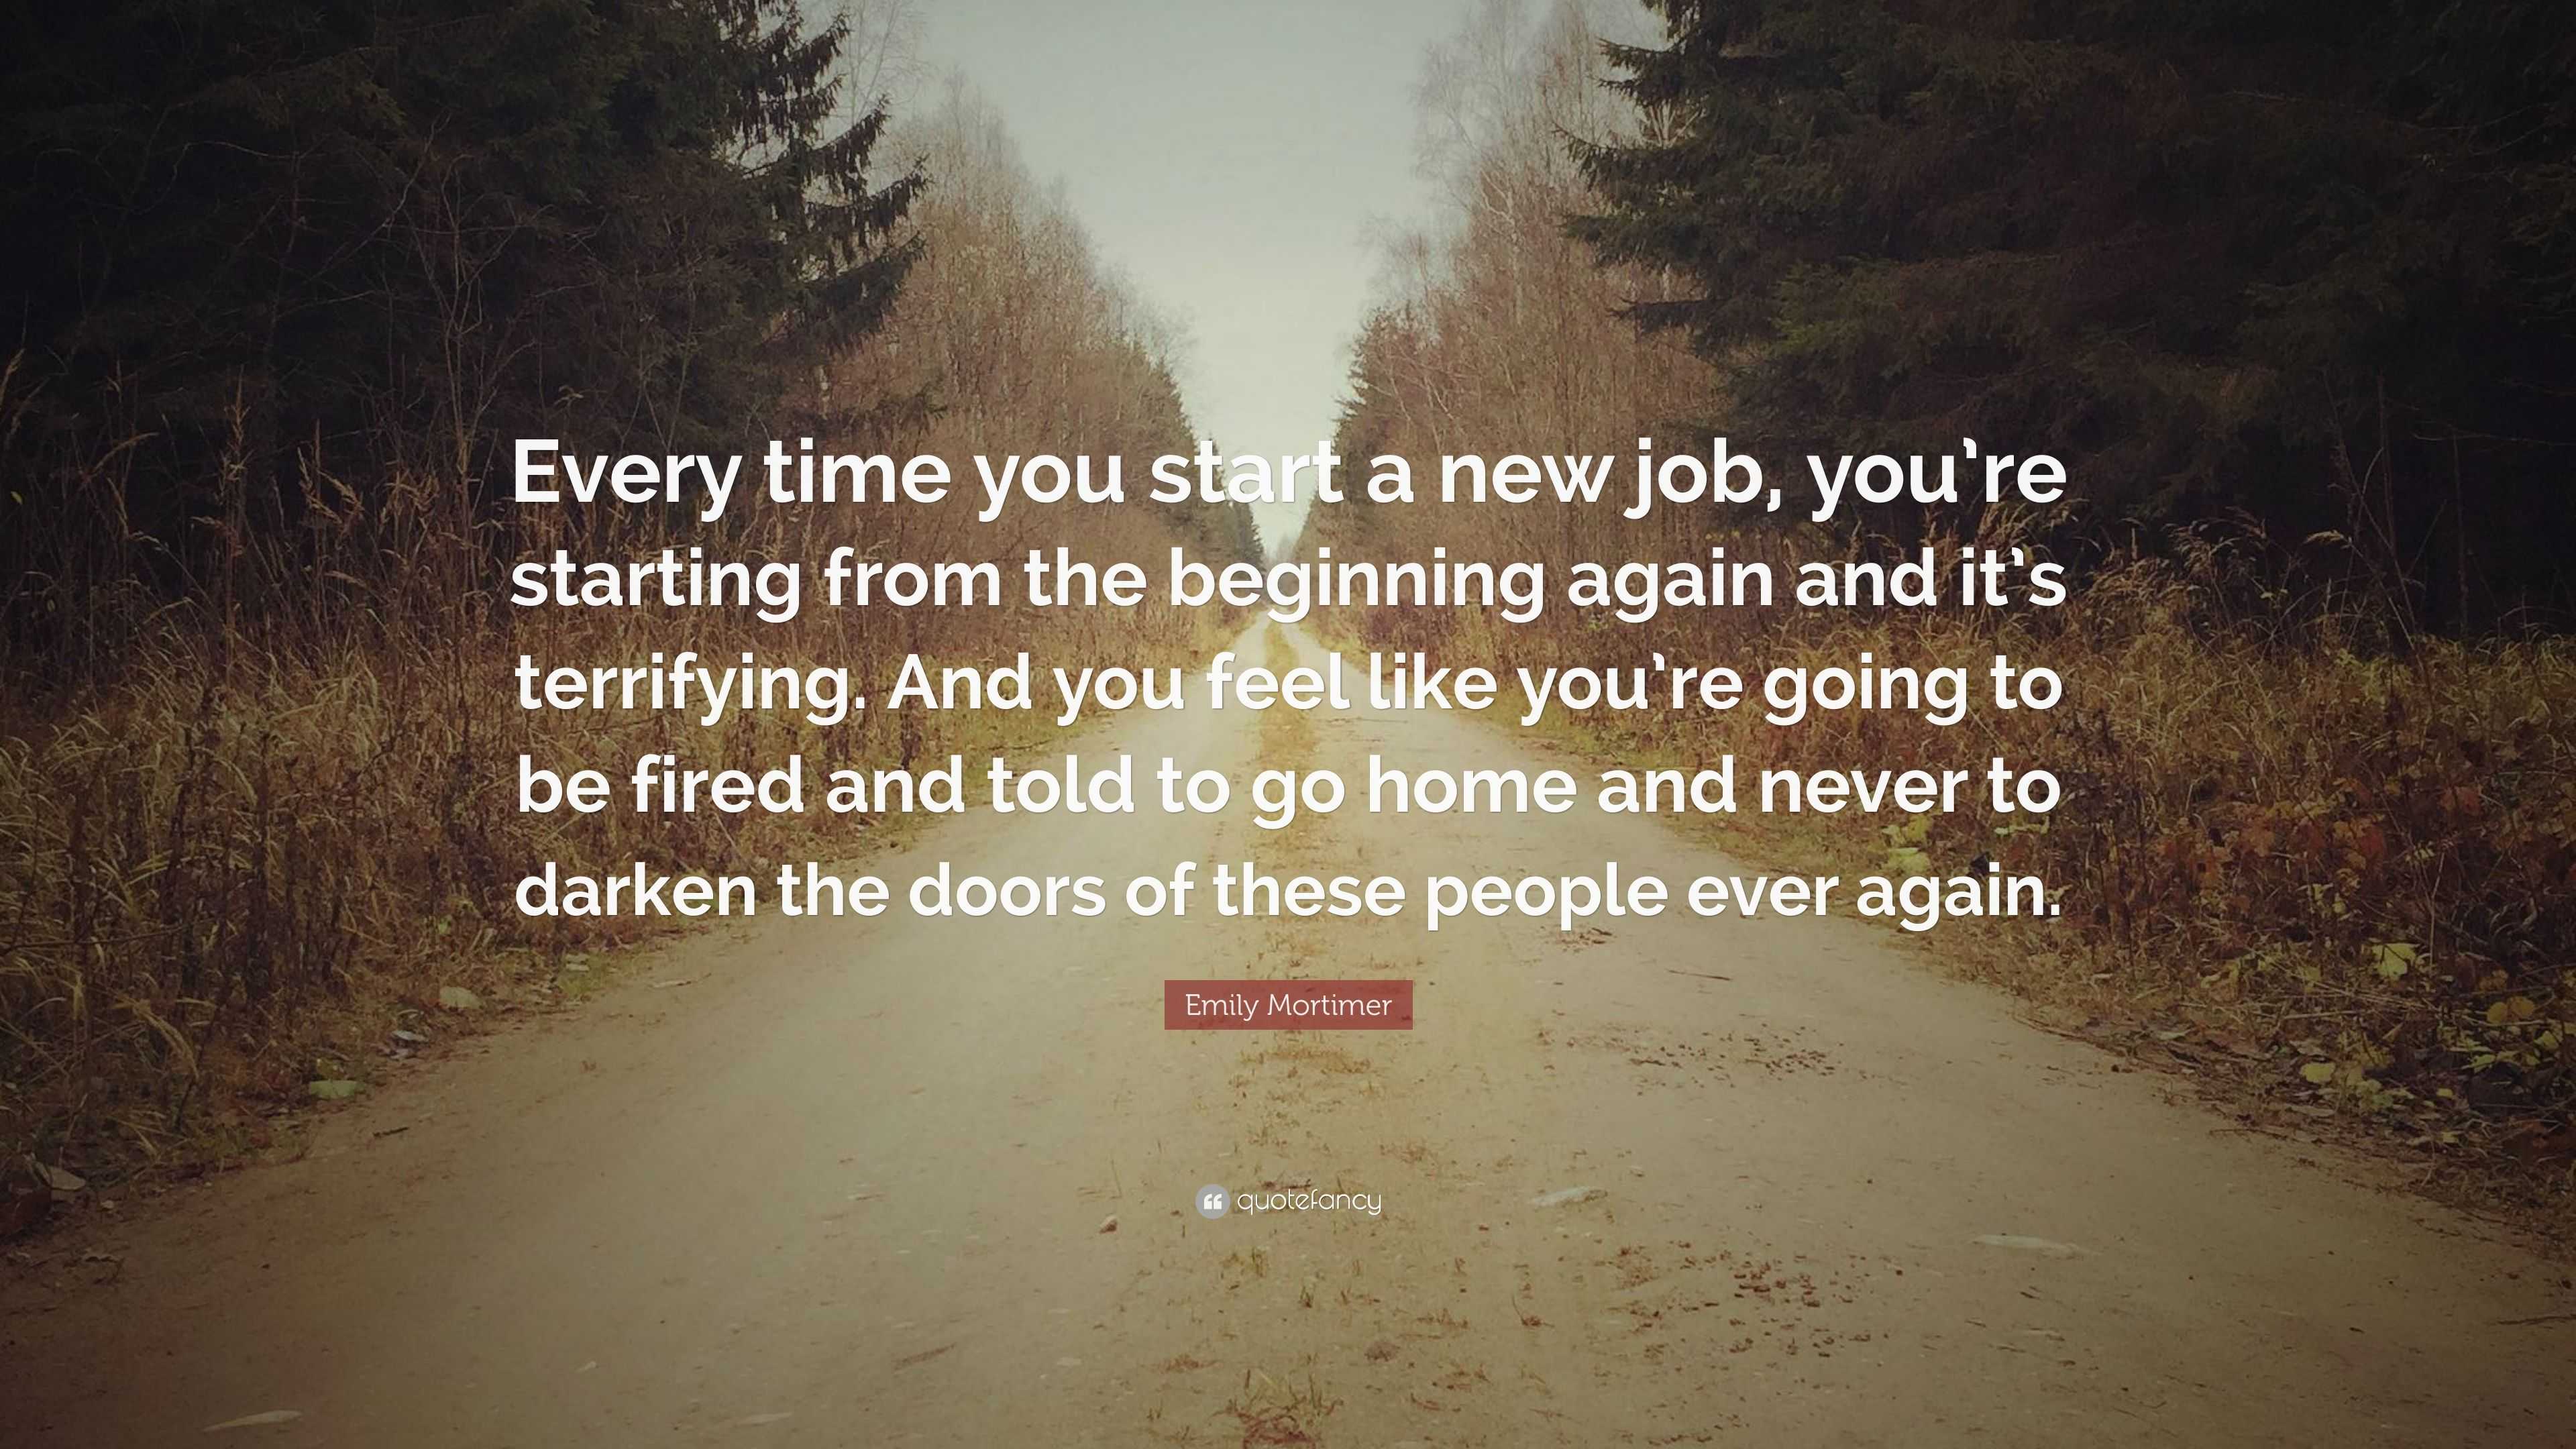 Emily Mortimer Quote “every Time You Start A New Job Youre Starting